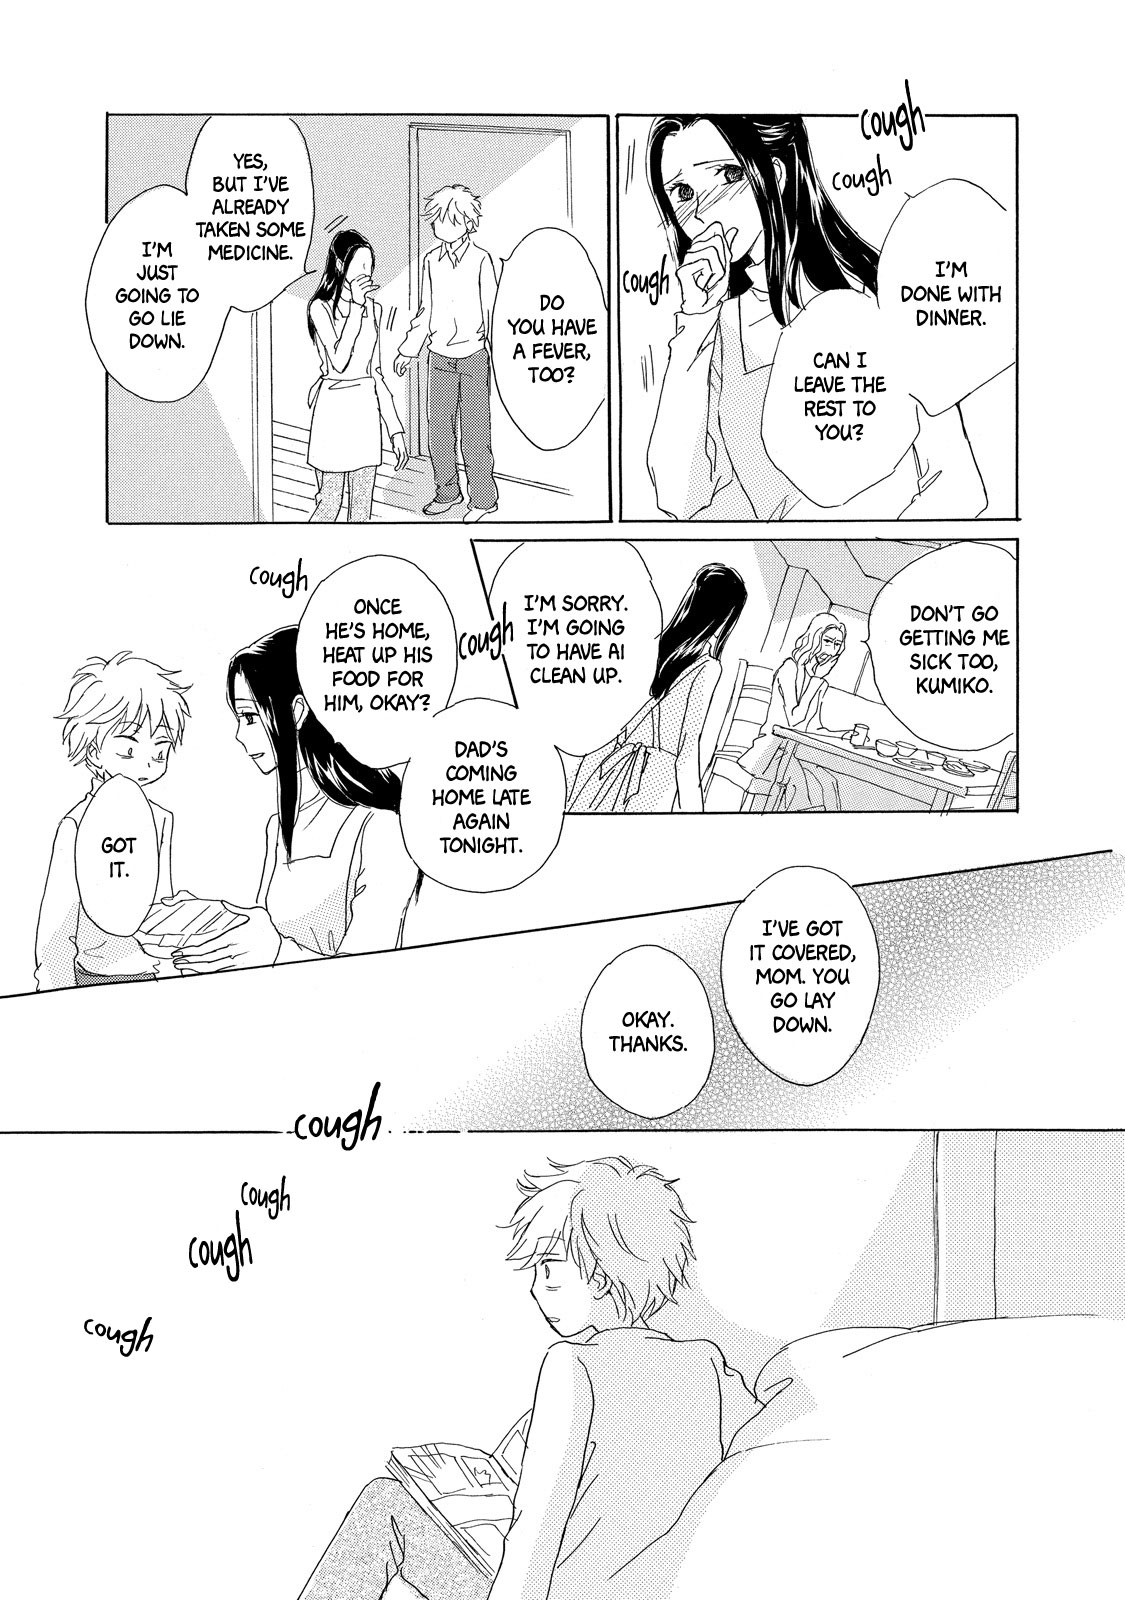 A Lovely Lonely Land Vol. 1 Ch. 2